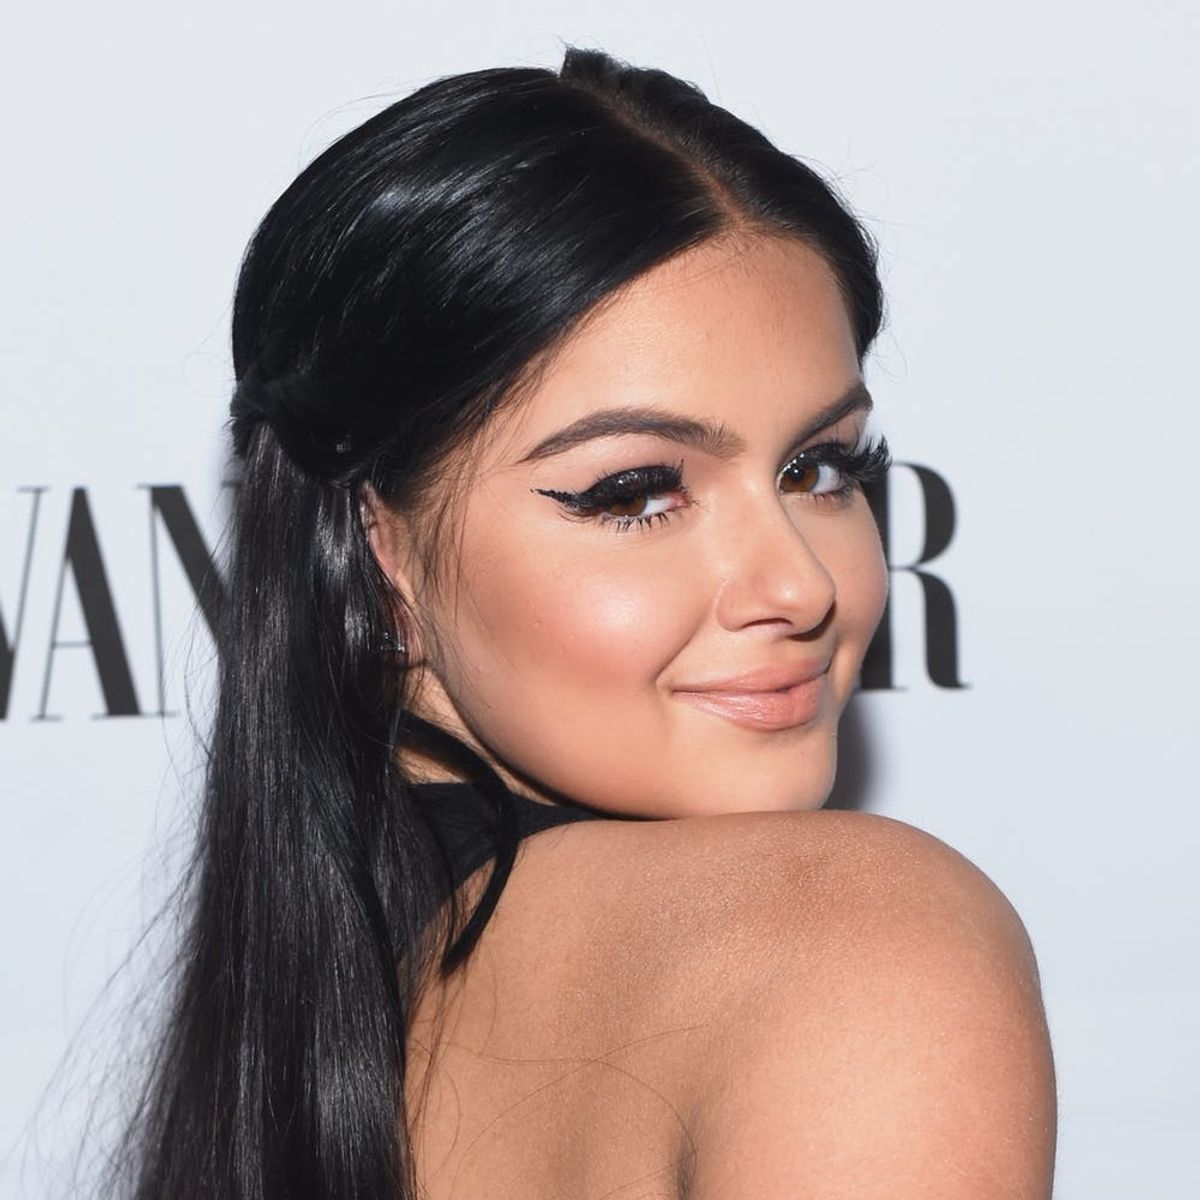 Ariel Winter Is Clapping Back at Online Bullies After They Came for Her Wardrobe… Again